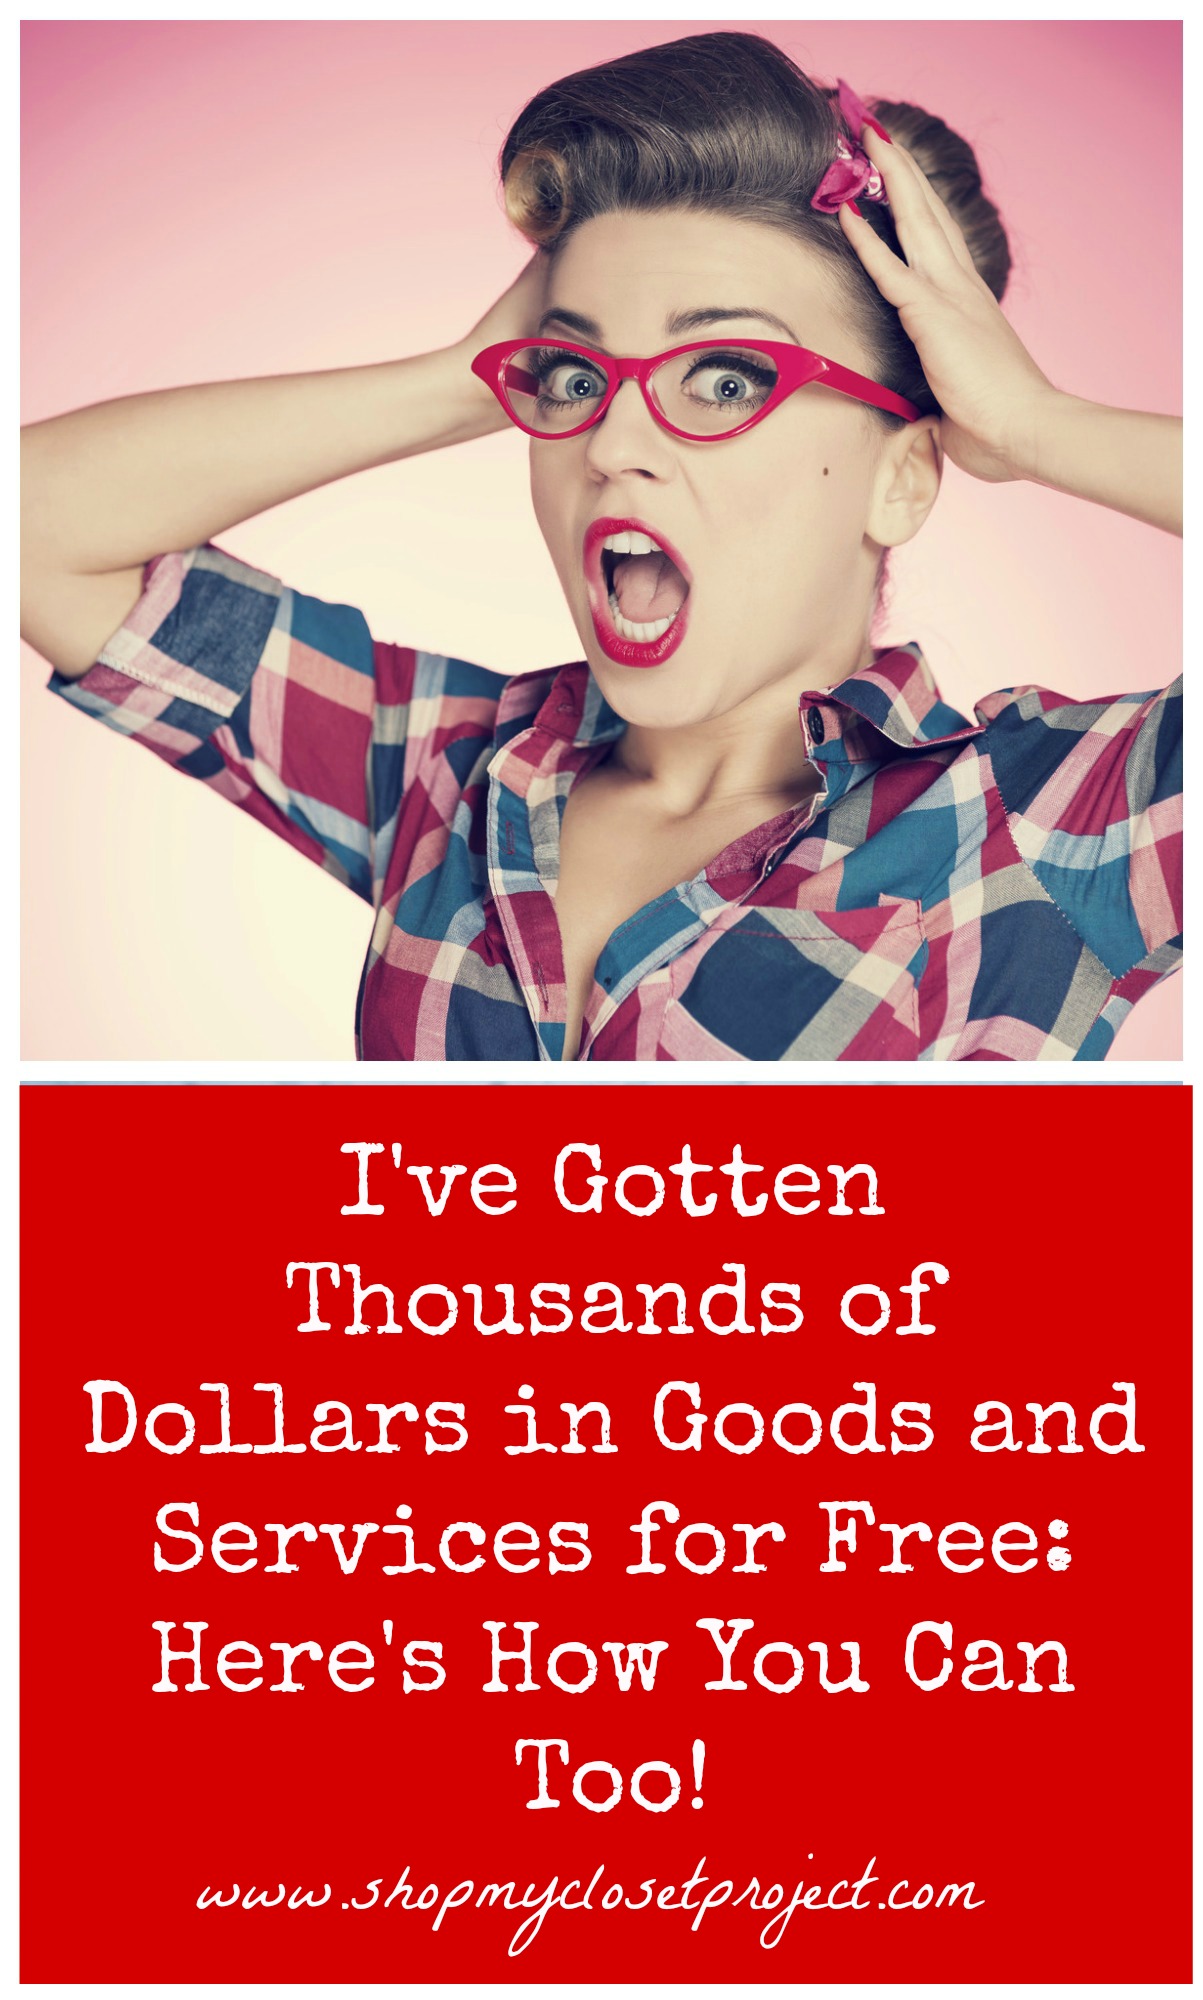 I’ve Gotten Thousands of Dollars in Goods and Services for Free: Here’s How You Can Too!